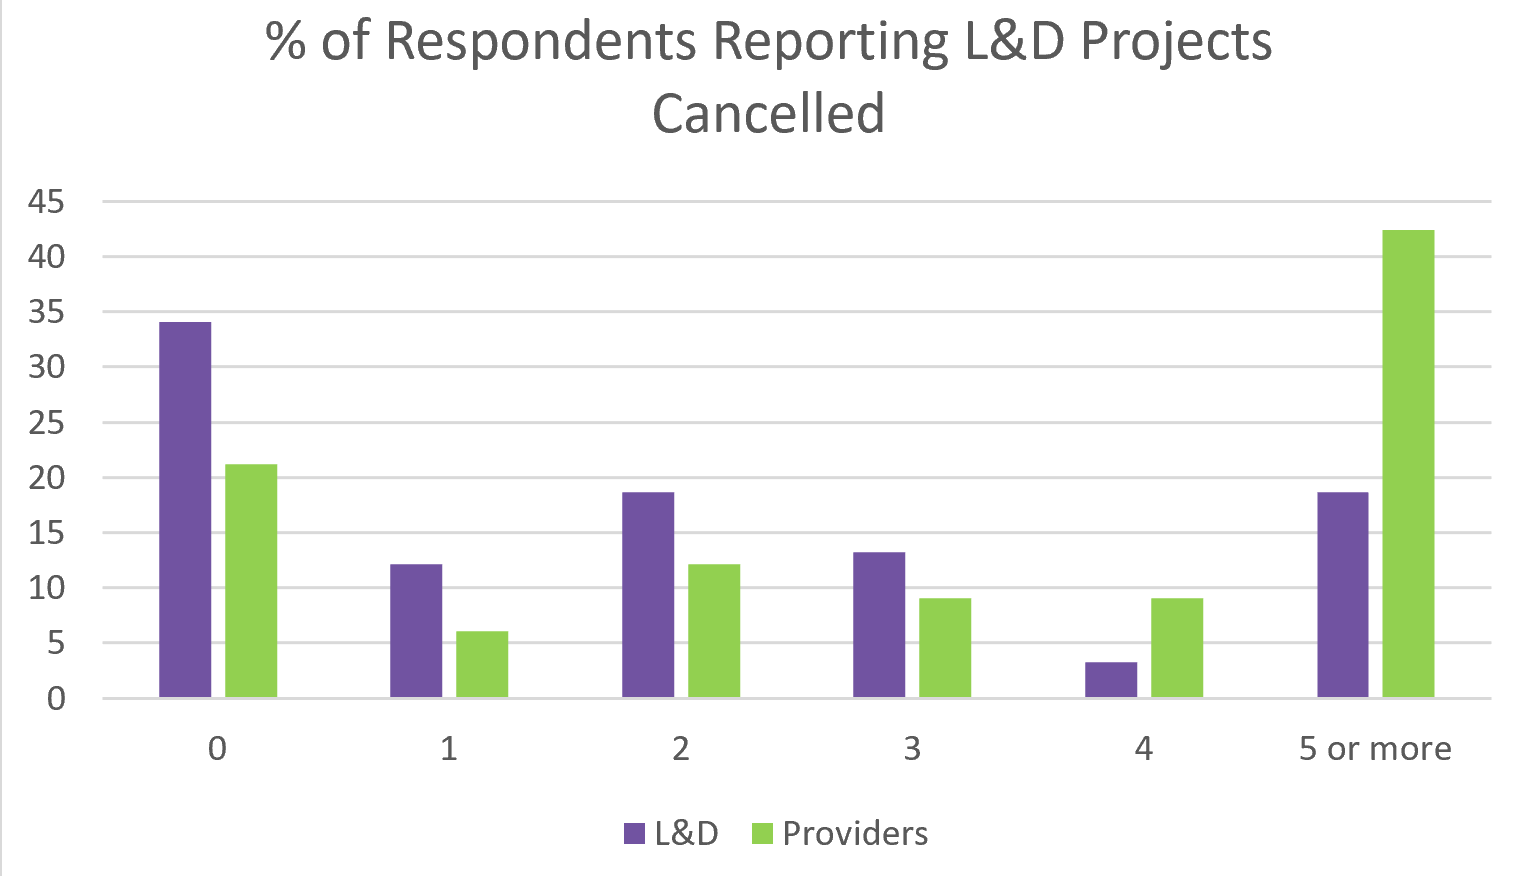 42% of providers report losing more than 5 projects that had been scheduled to launch